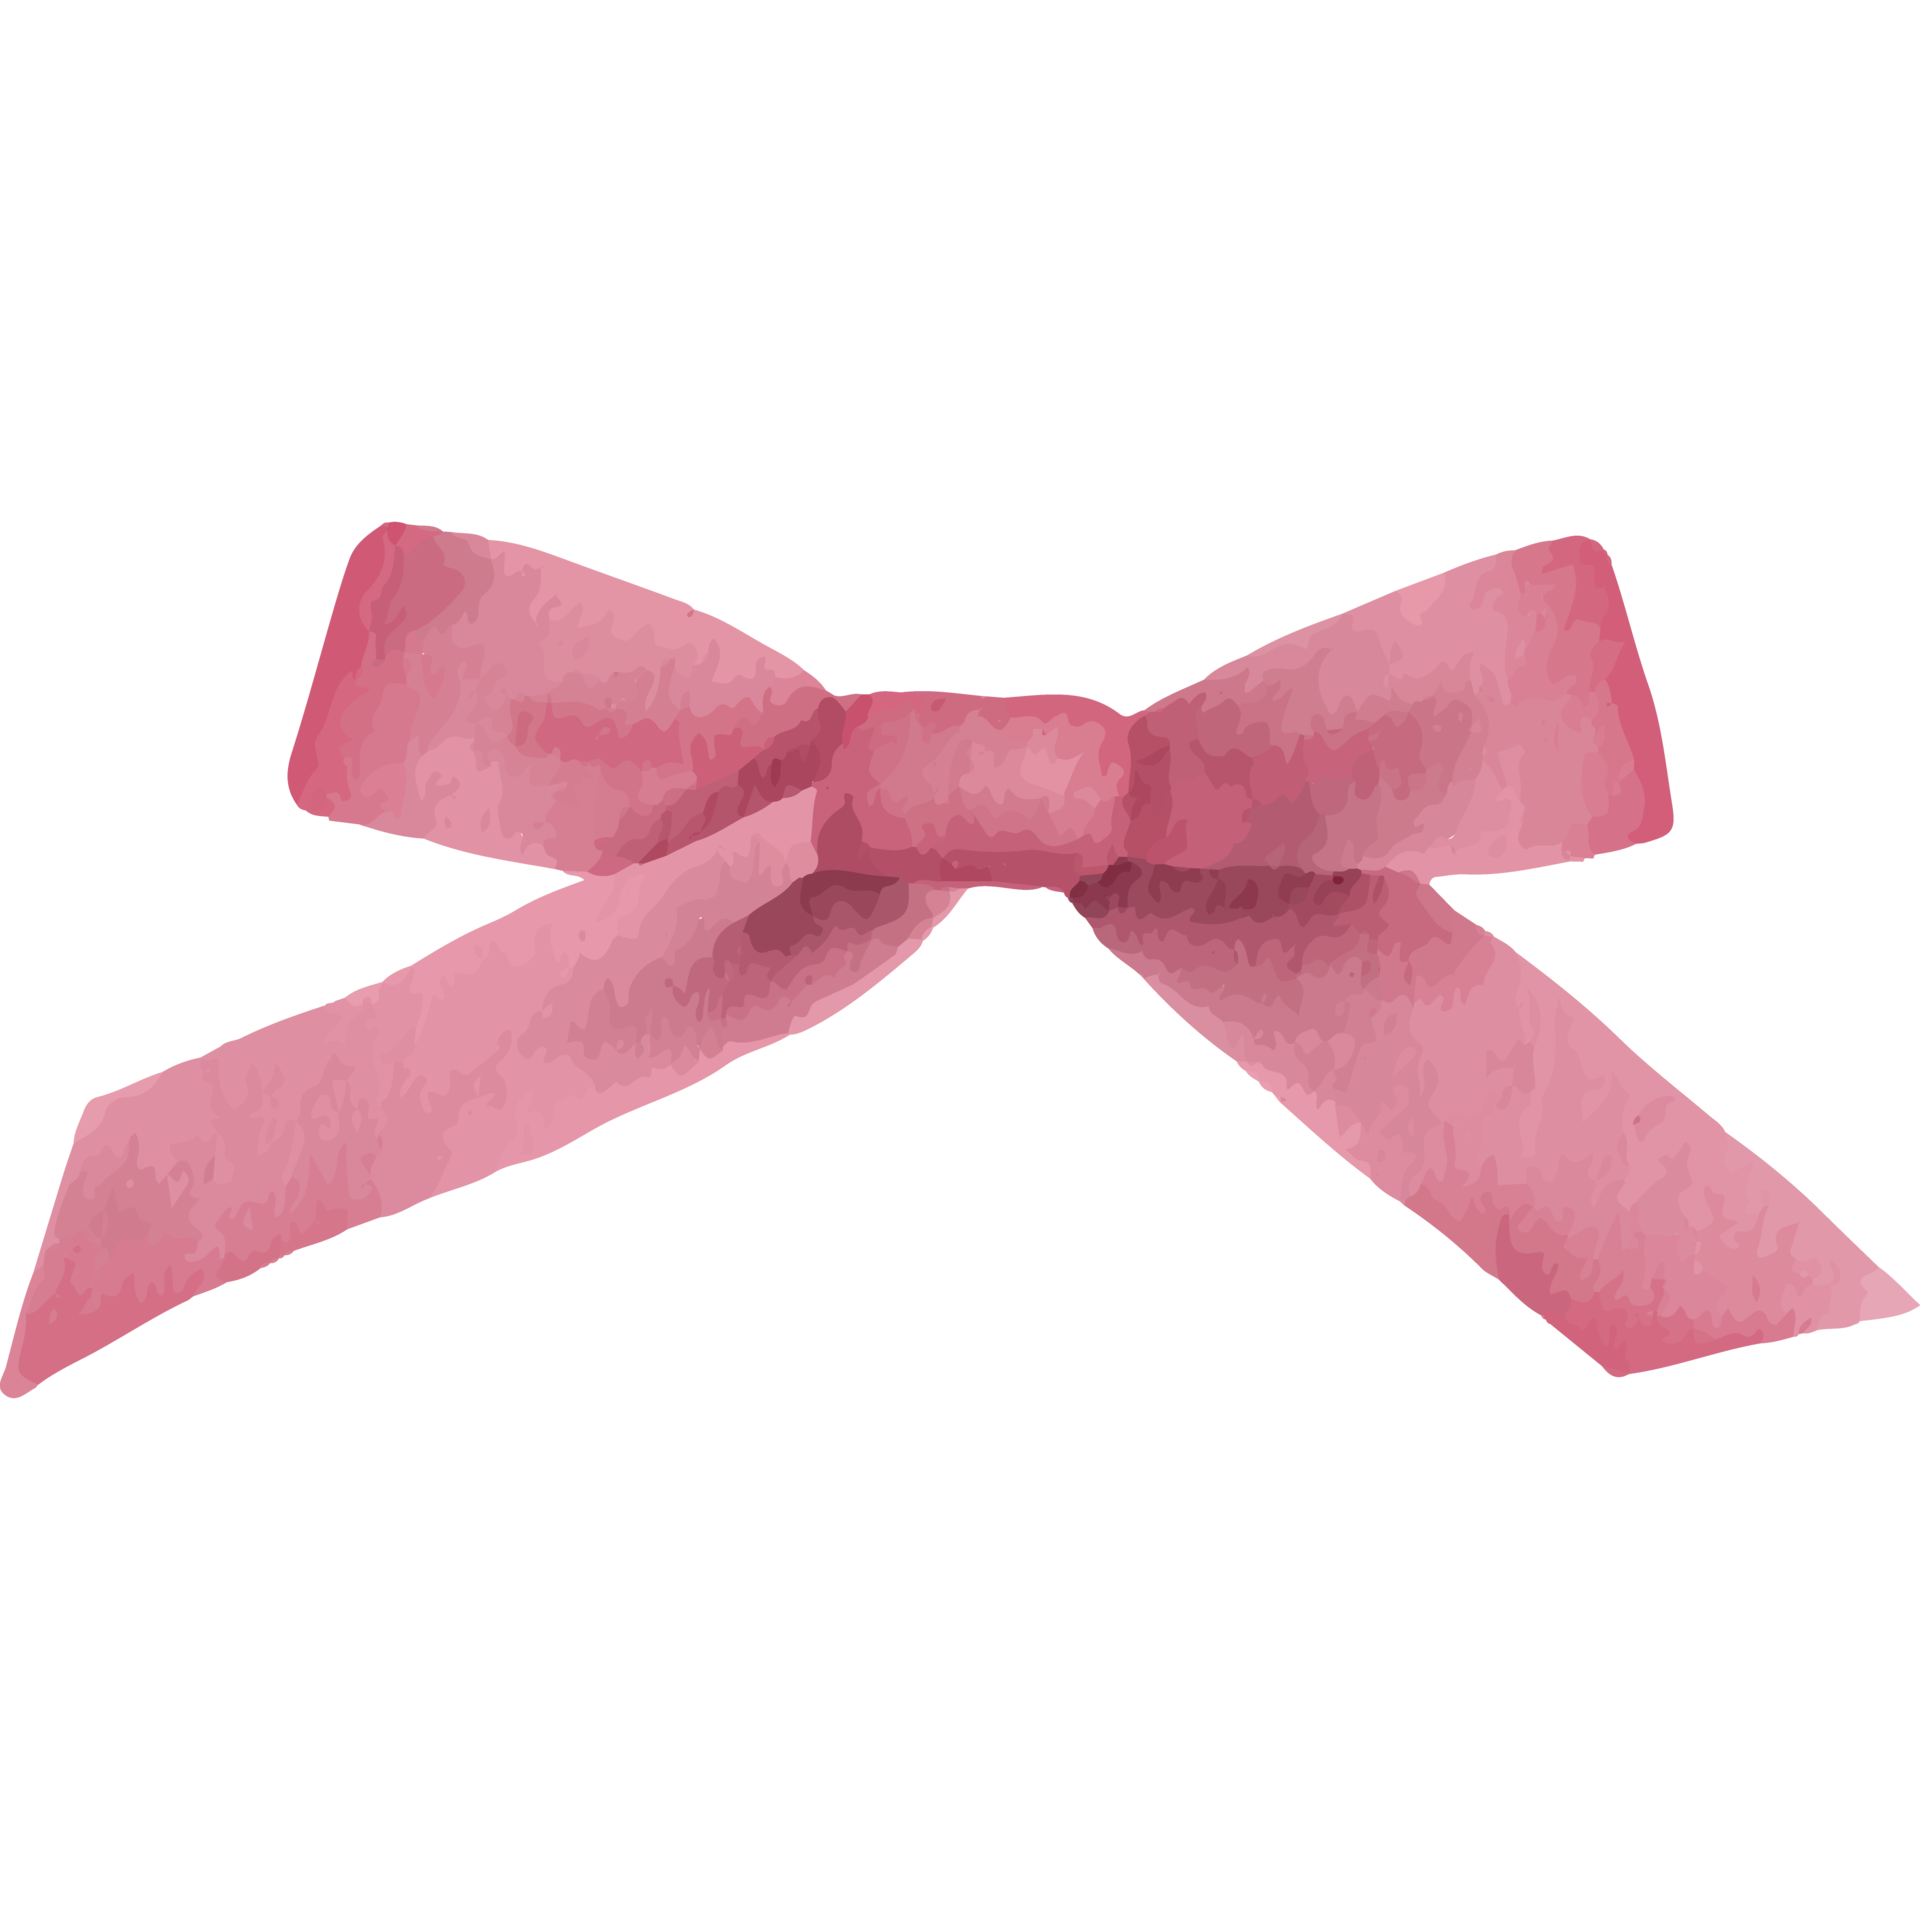 Pink Ribbon Color Bows Isolated on Transparent Background 24187203 PNG